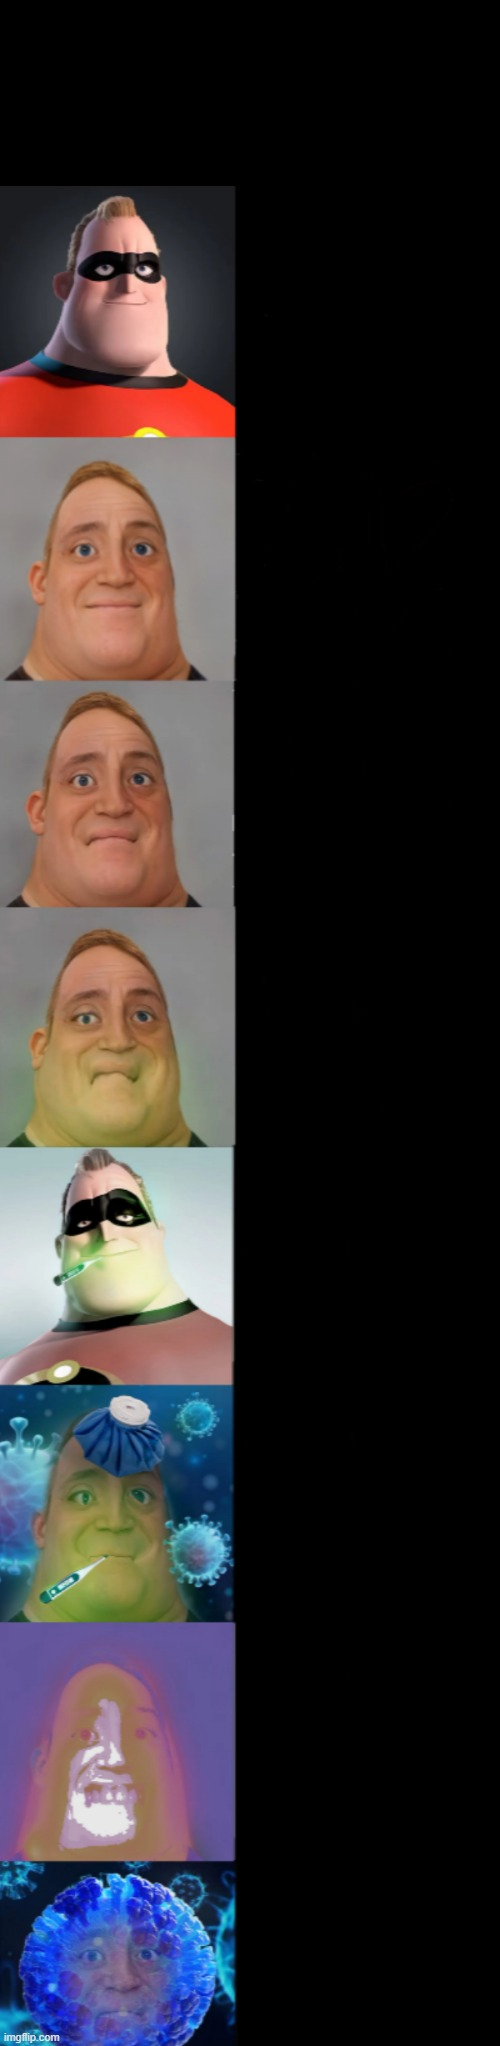 Mr incredible becoming sick(Fixed Textboxes) Blank Meme Template